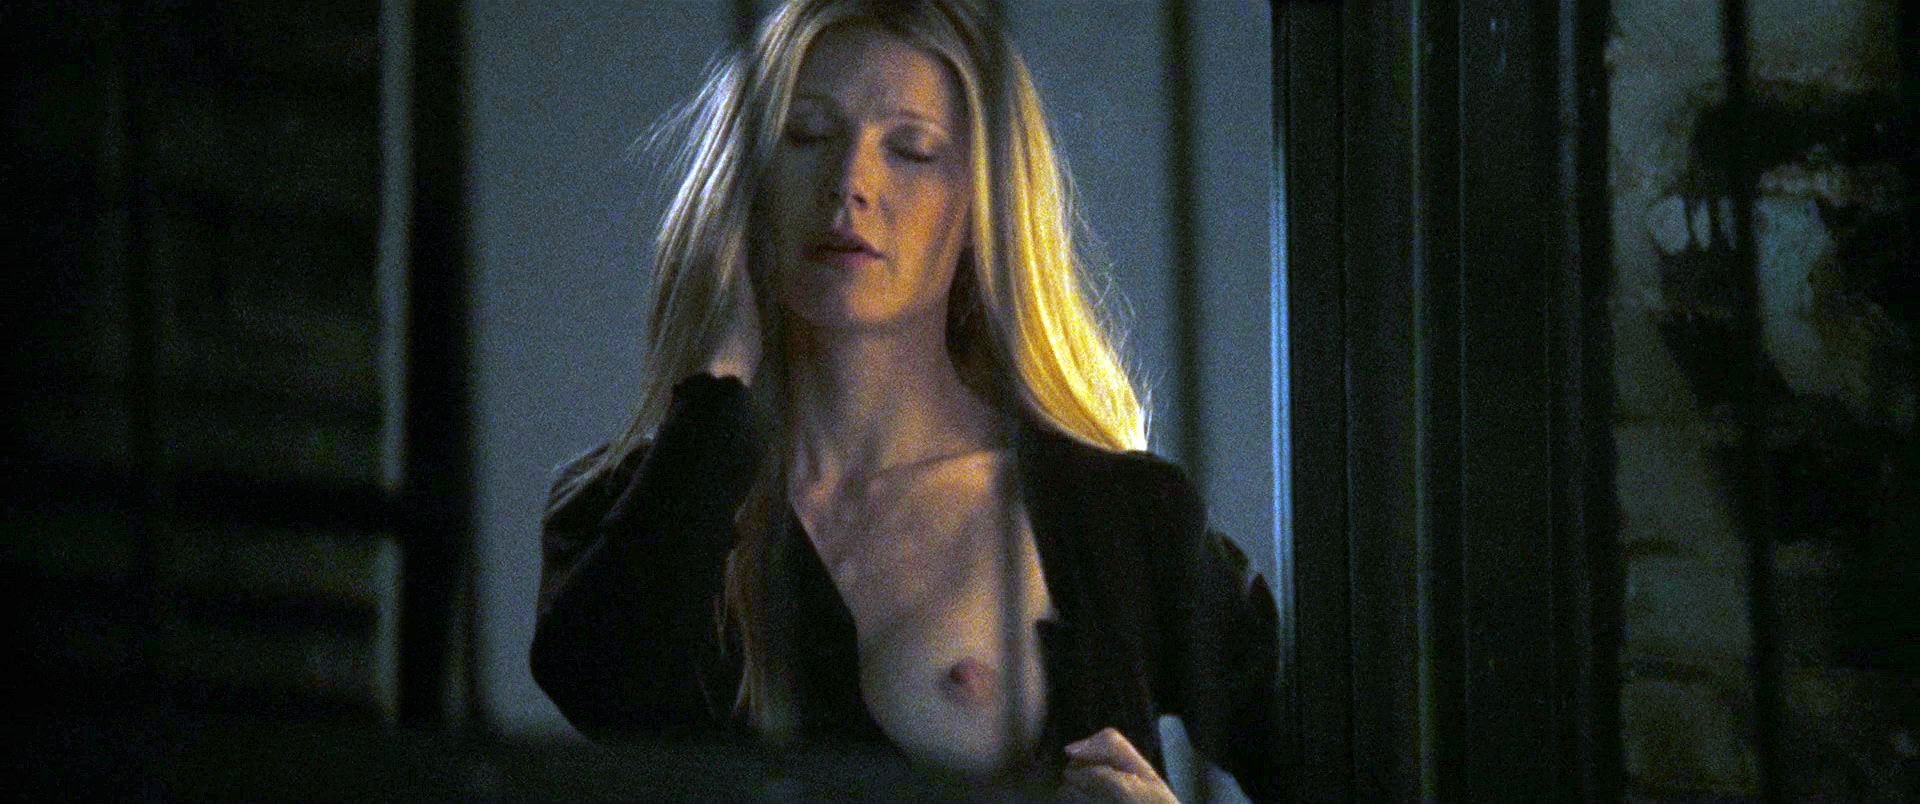 Gwyneth Paltrow Nude  Sexy Compilation (4 Pics + Video)